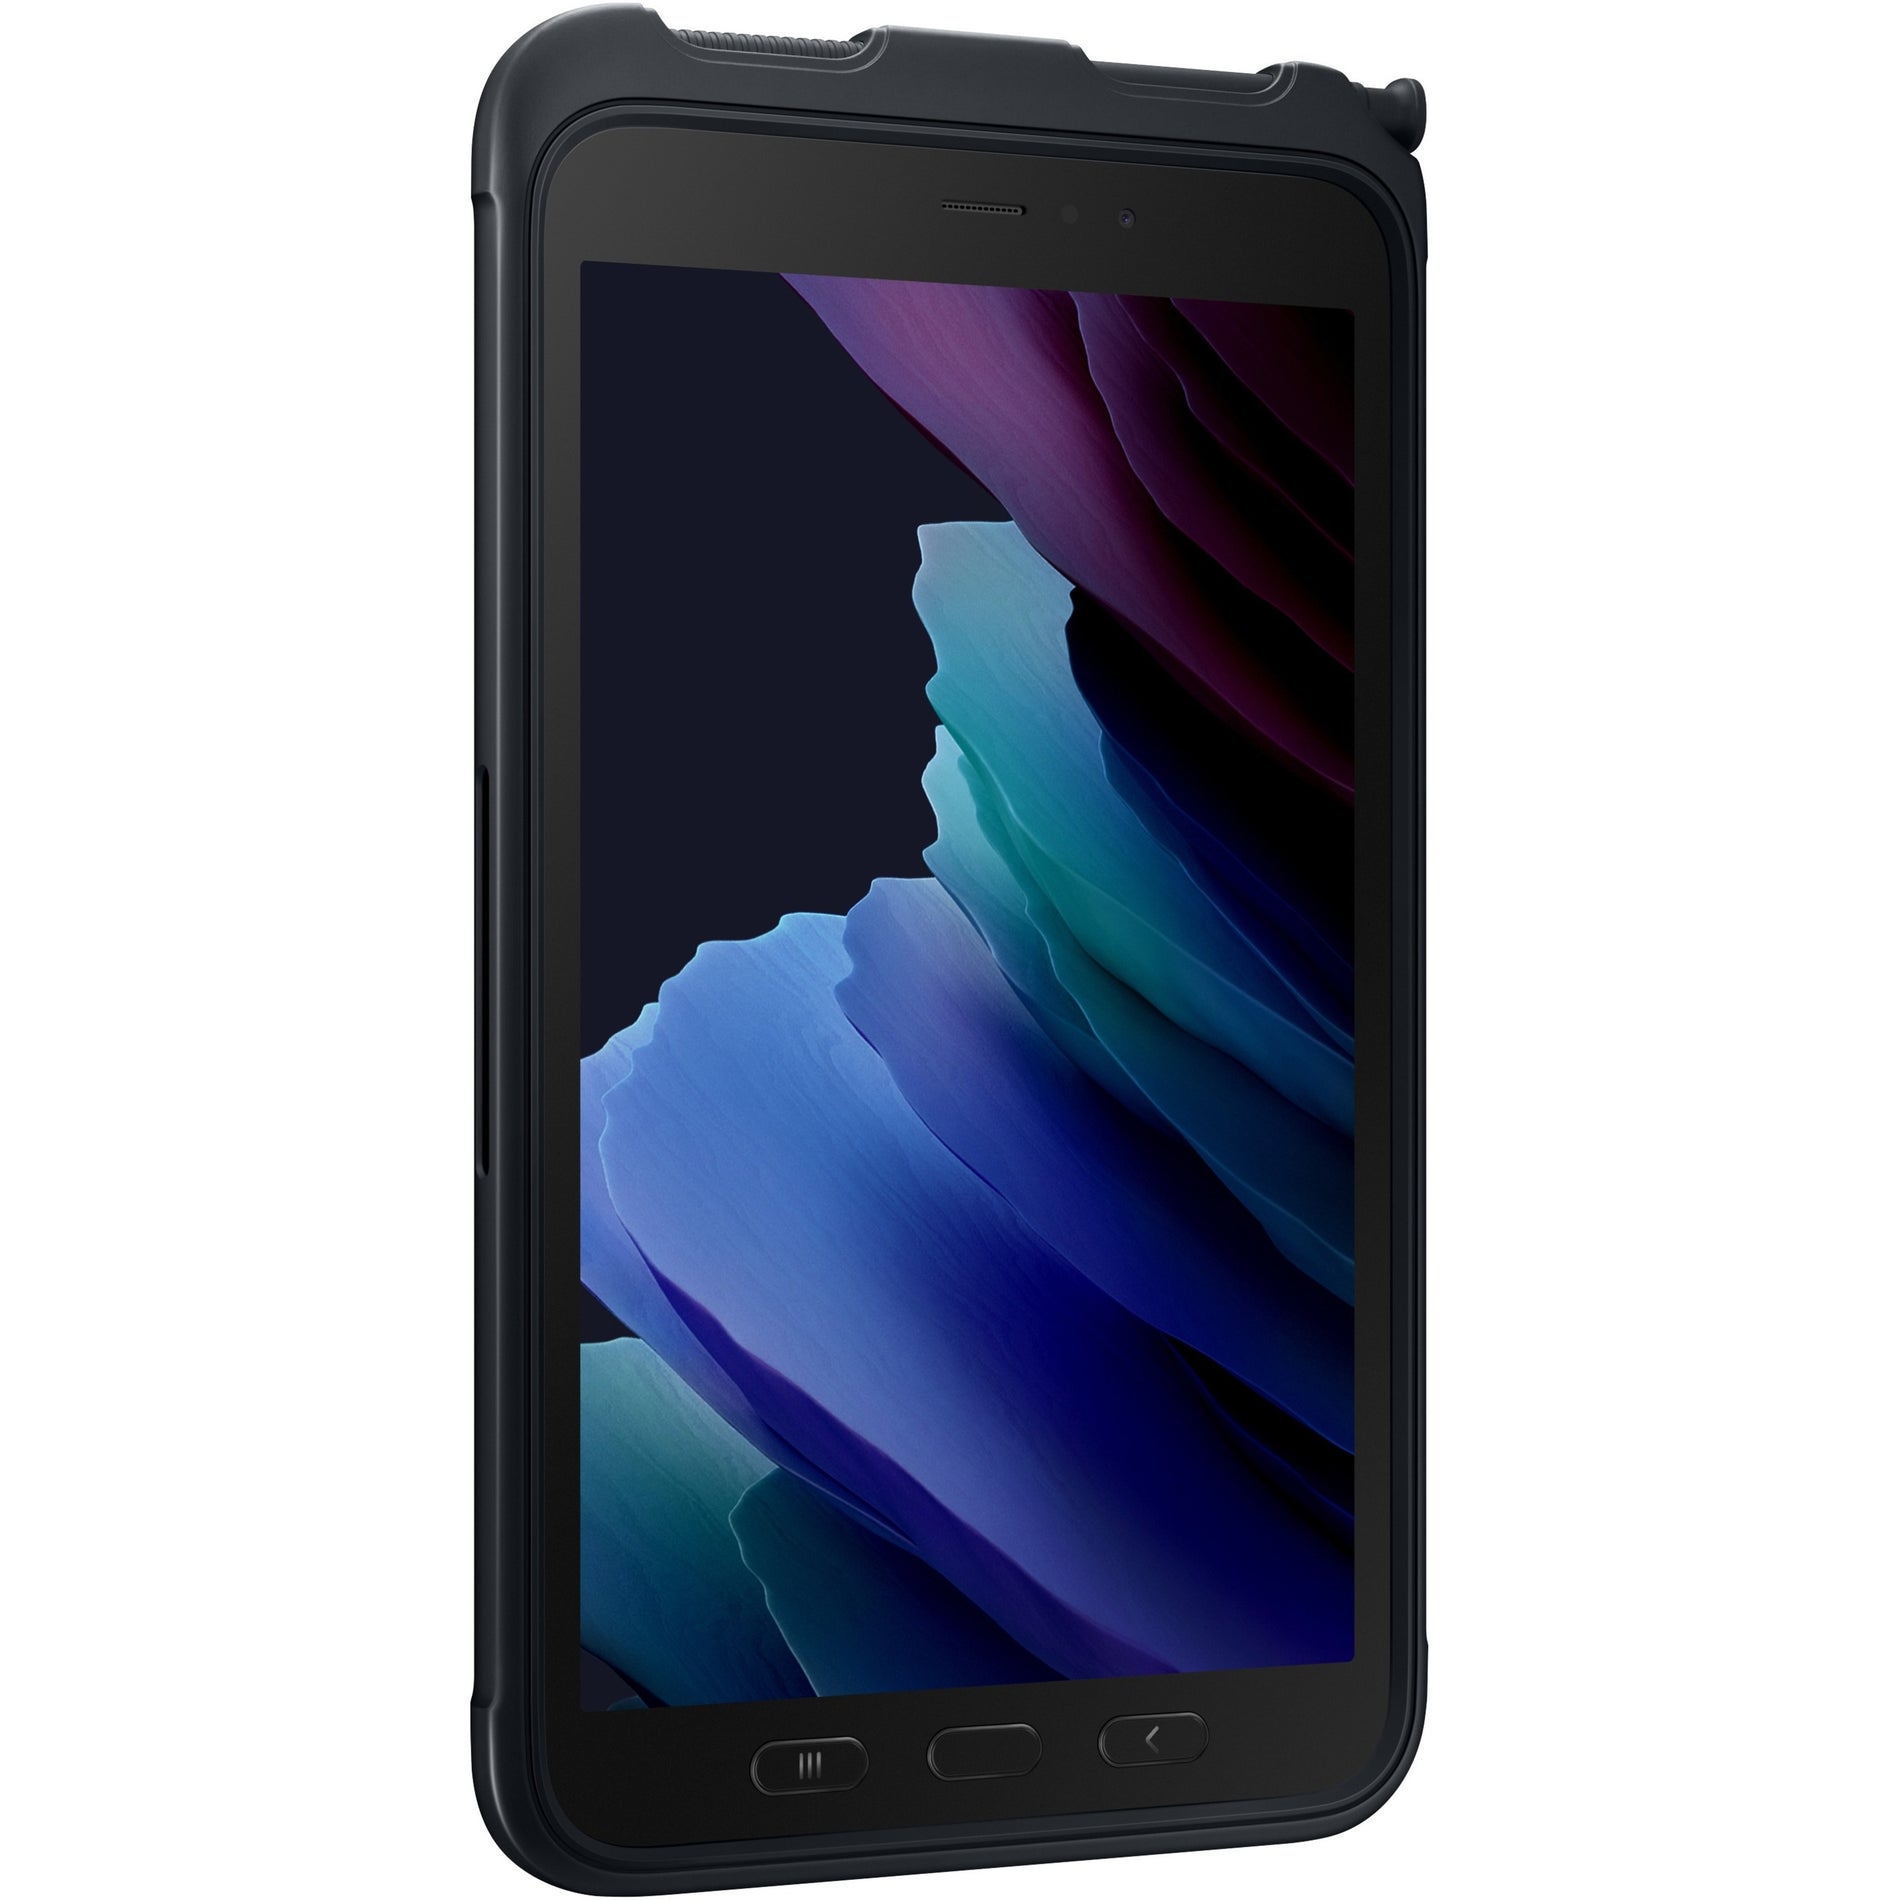 Samsung Galaxy Tab Active3 Rugged Tablet - 8" WUXGA - Octa-core (8 Core) 2.70 GHz 1.70 GHz - 4 GB RAM - 64 GB Storage - Android 10 - Black (SM-T570NZKAN20) Alternate-Image5 image